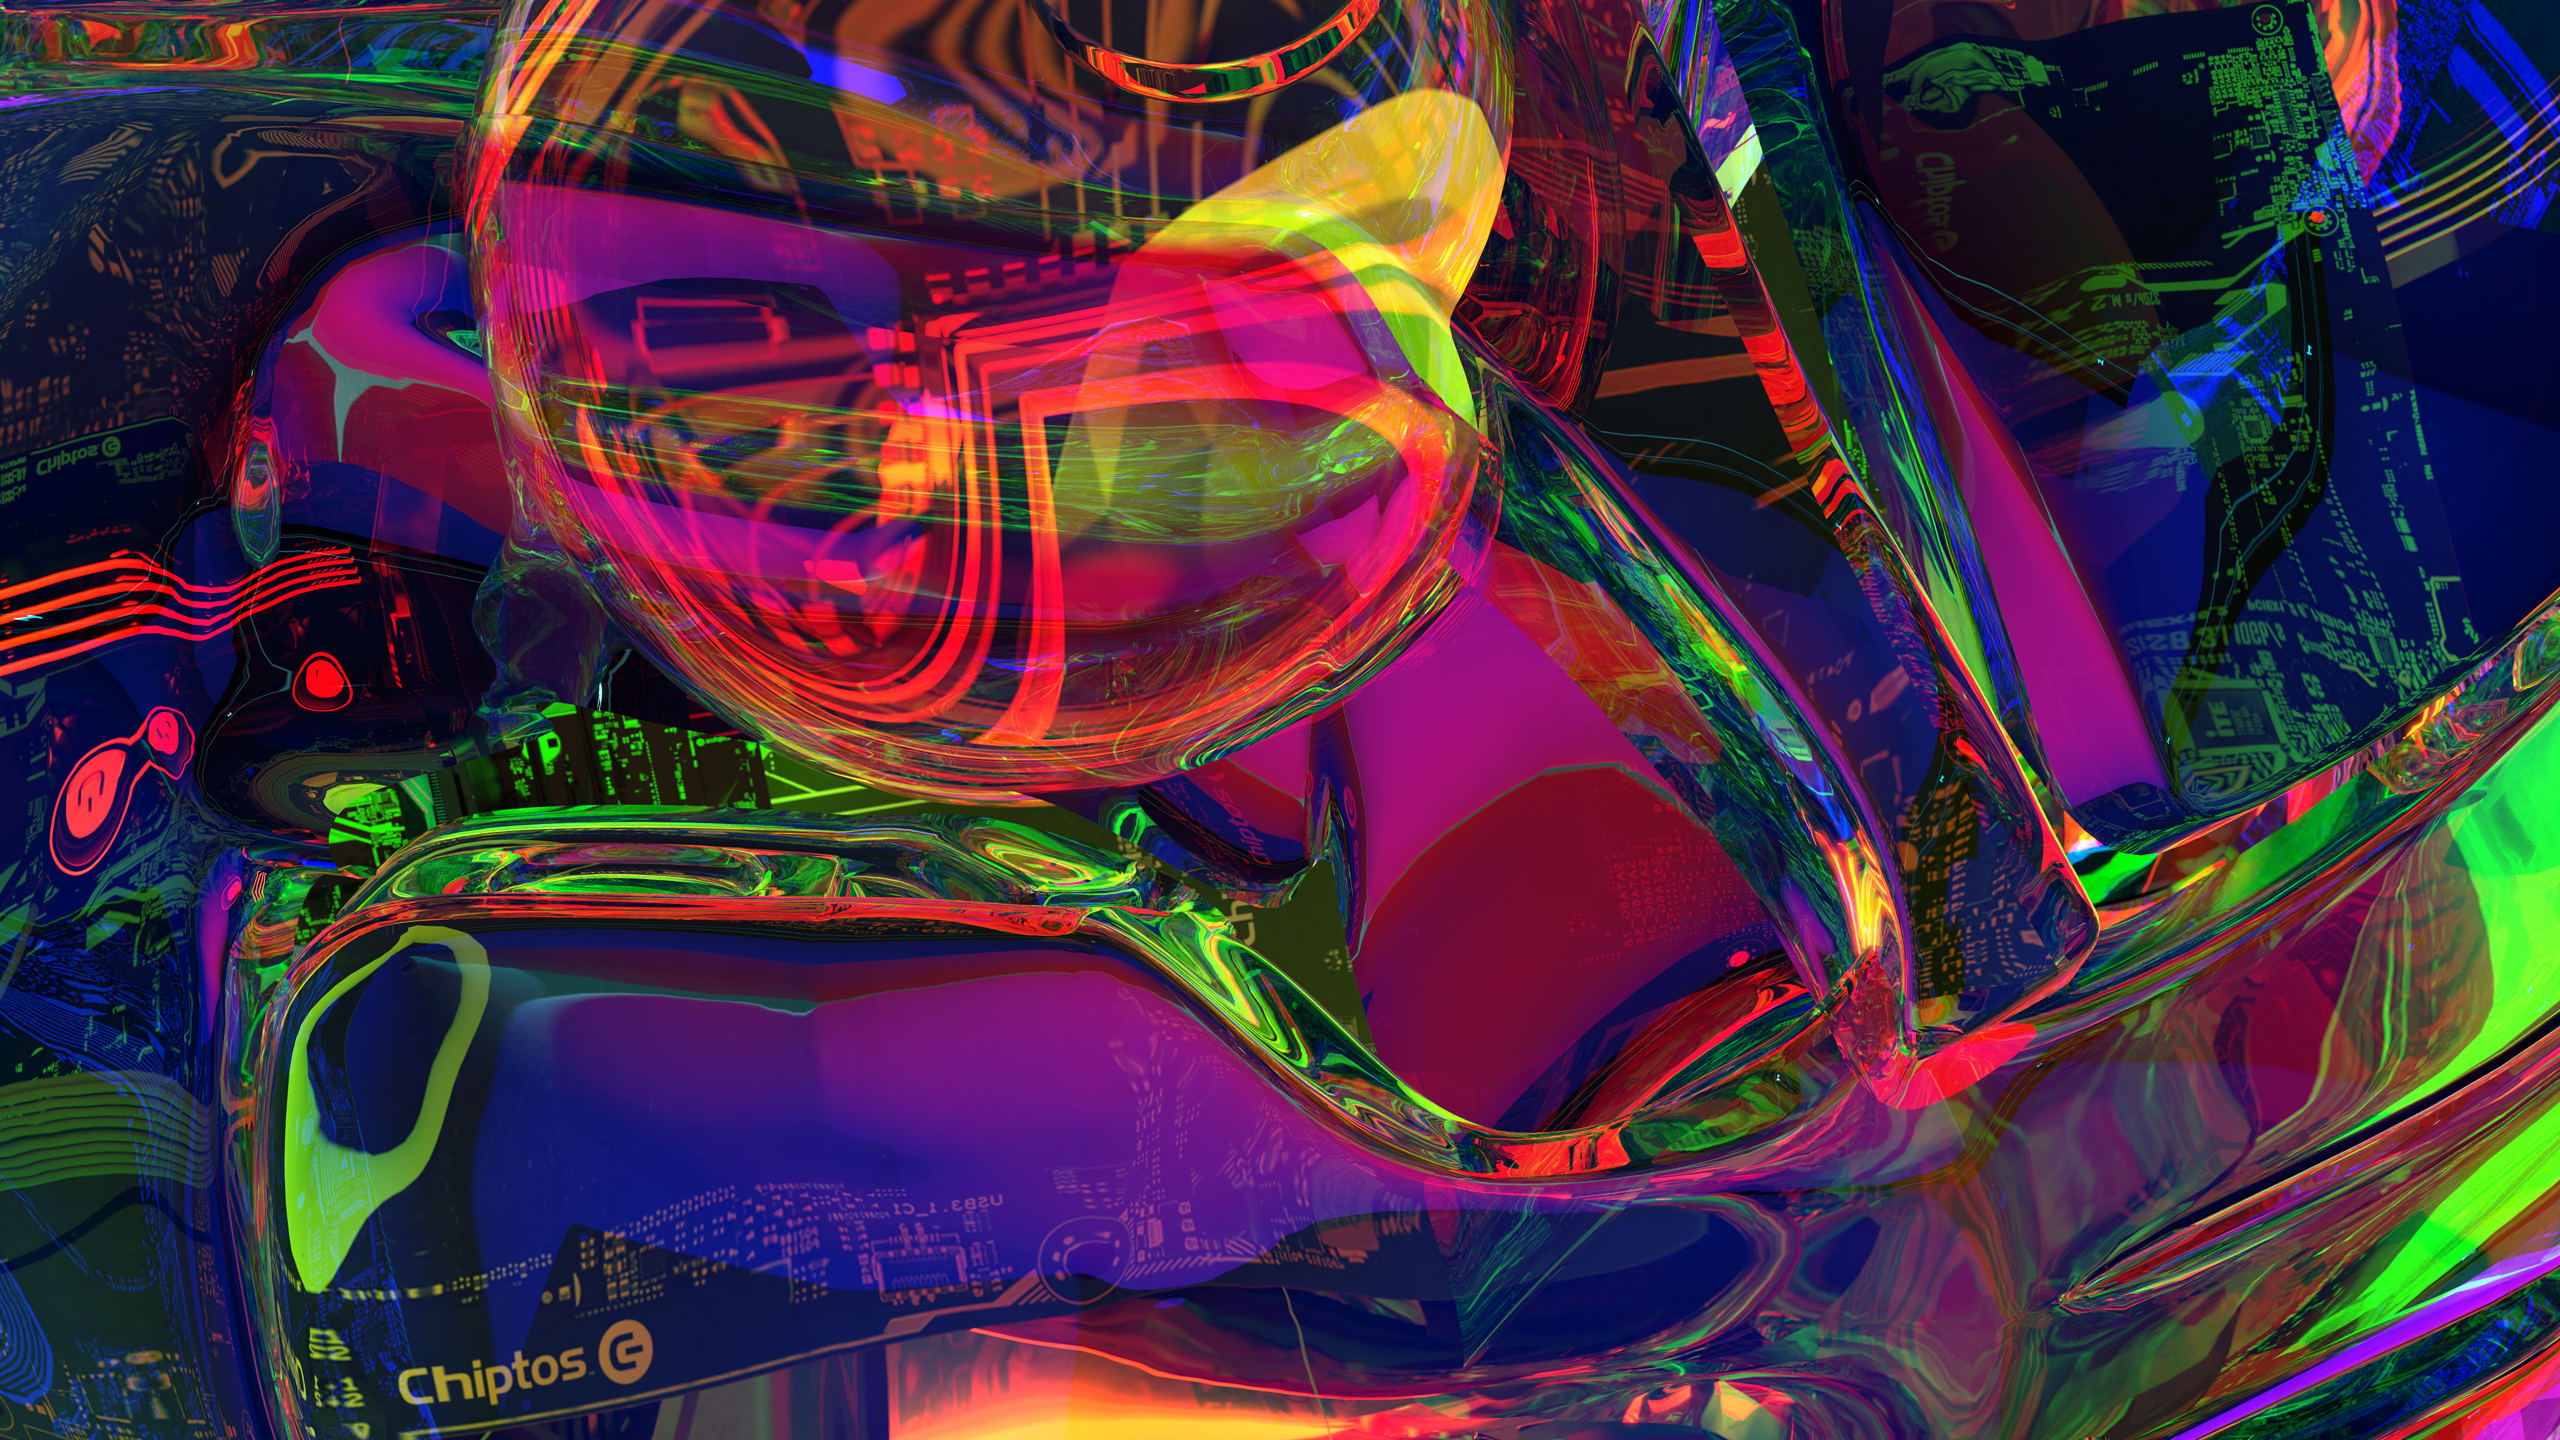 General 2560x1440 glass design abstract 3D Abstract computer PC cases PC build motherboards computer parts colorful technology digital art